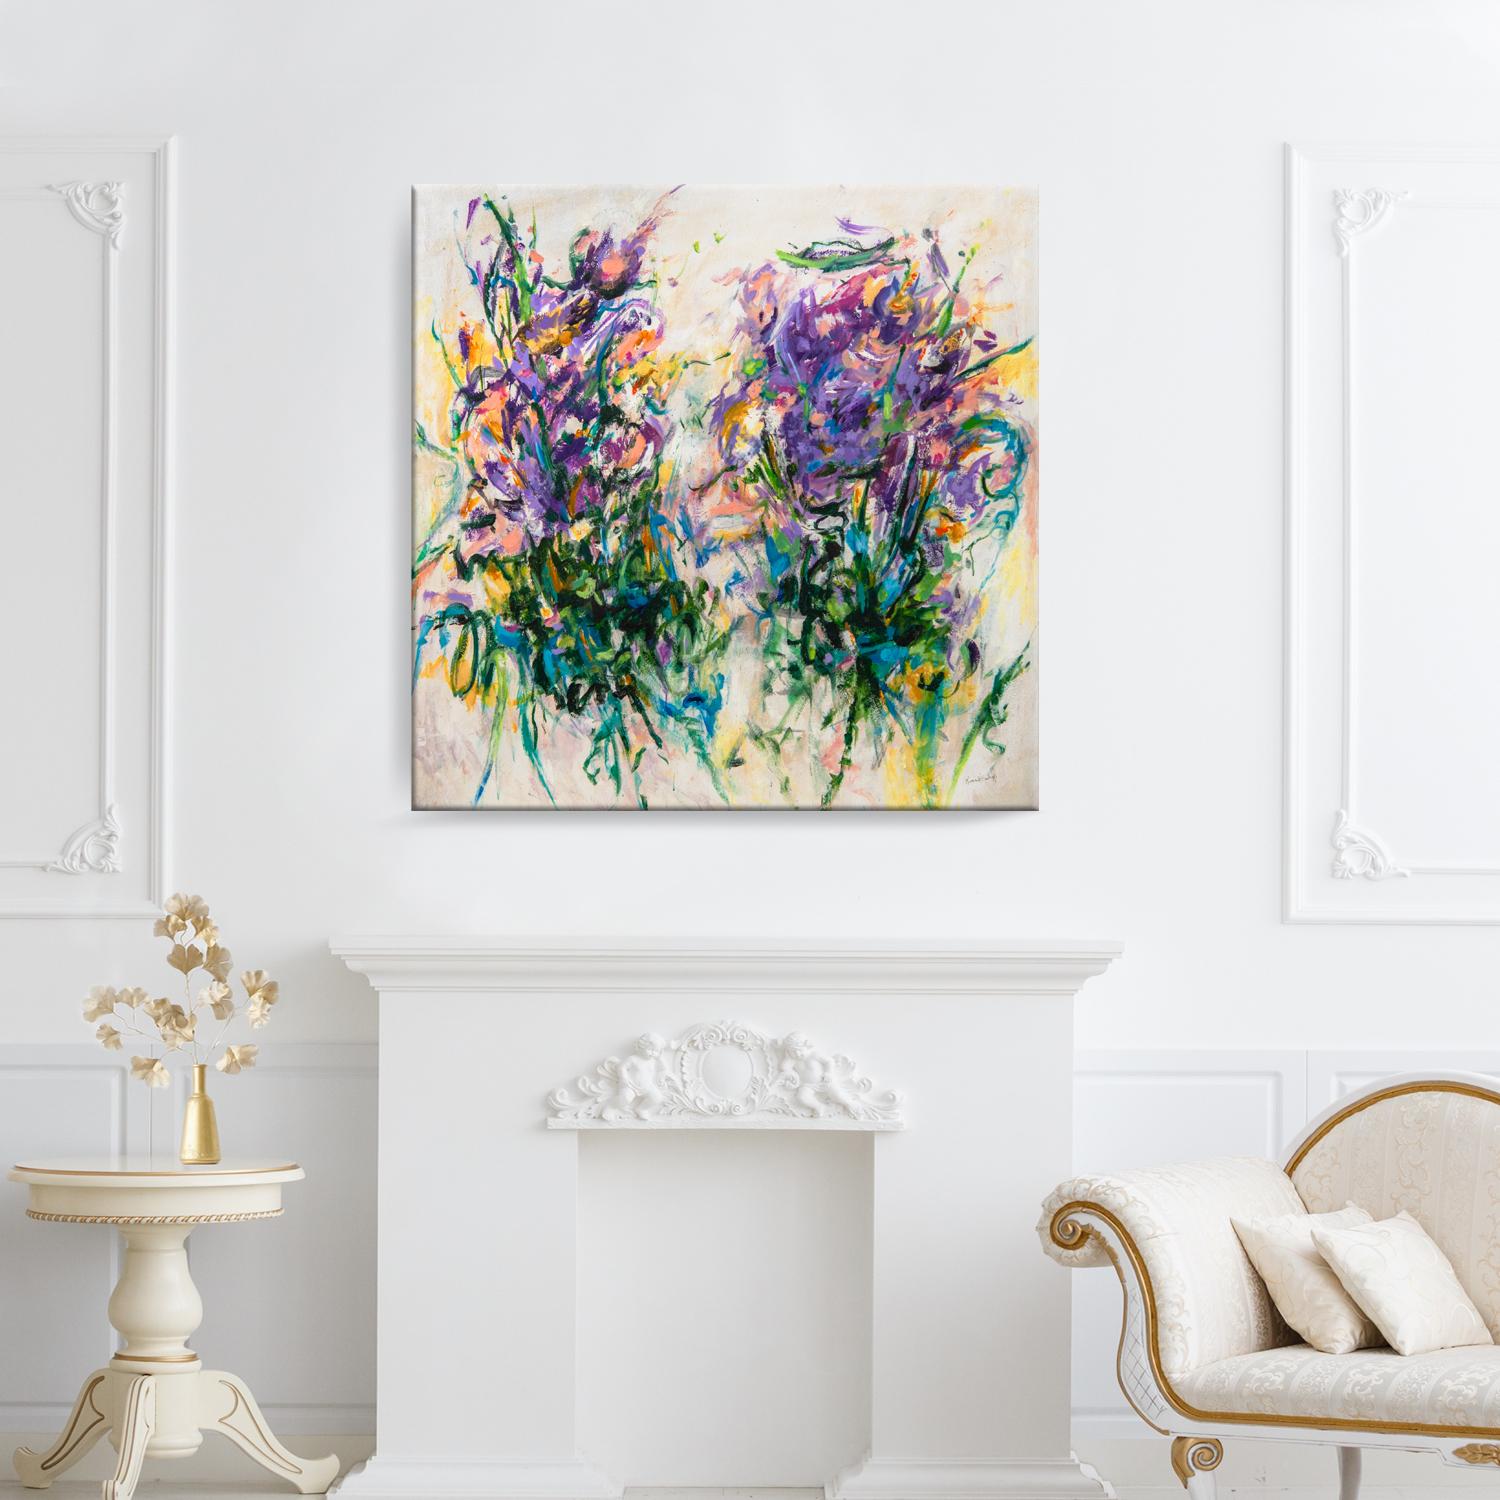 'Gathering the Violets' Wrapped Canvas Original Painting features an energetic abstract aesthetic in vibrant tones of purple, blue, green, yellow, black, beige, and blush. Modern divinity expressed on canvas, Karen H. Salup’s work exhibits a